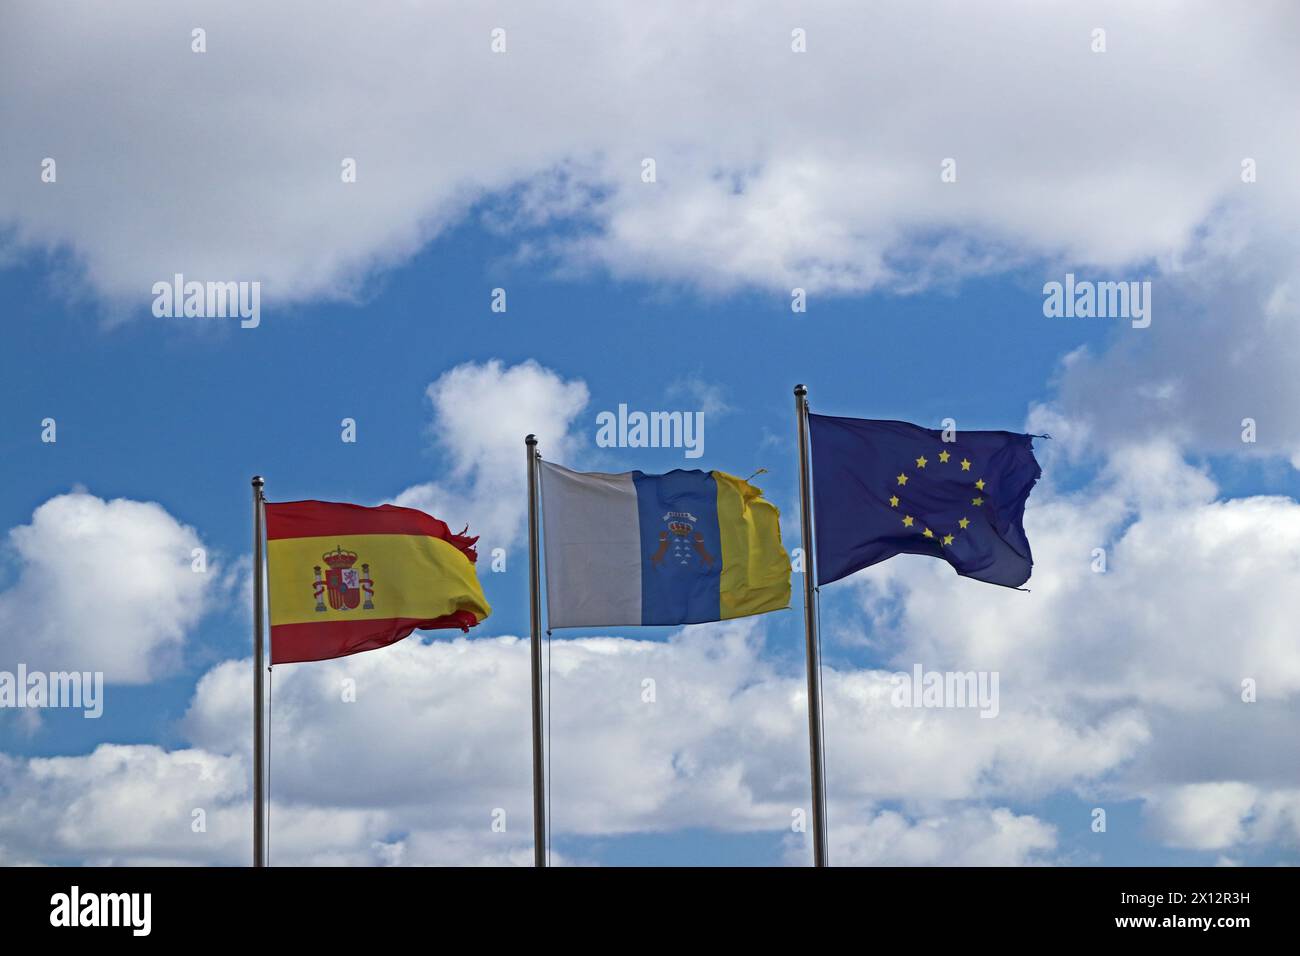 Flags of Spain, Canary Islans and EU flying Stock Photo